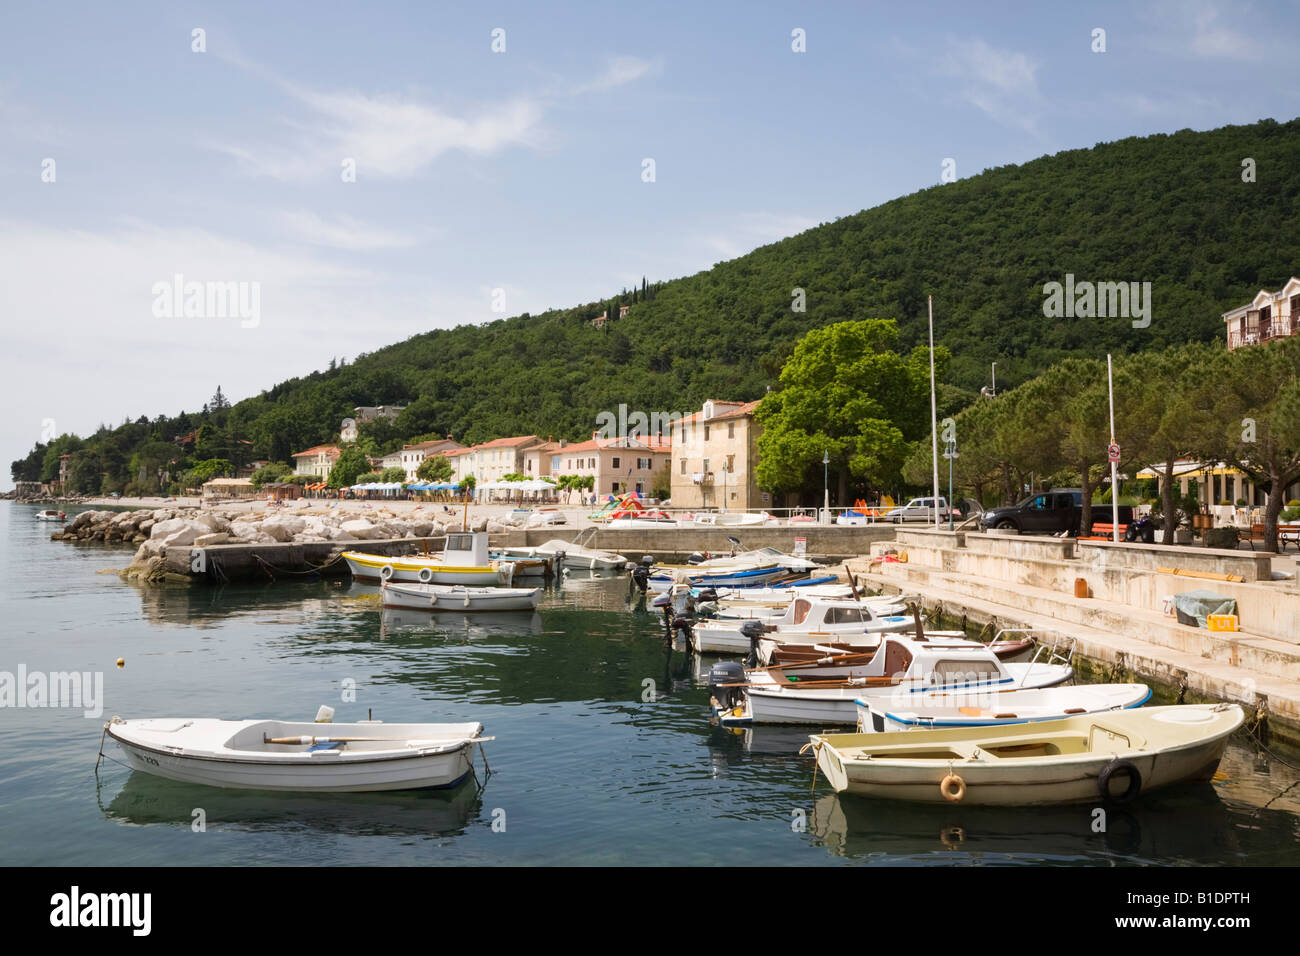 Moscenicka Draga Istria Croatia Moored boats in sheltered fishing harbour in tourist resort town on Kvarner coast Stock Photo